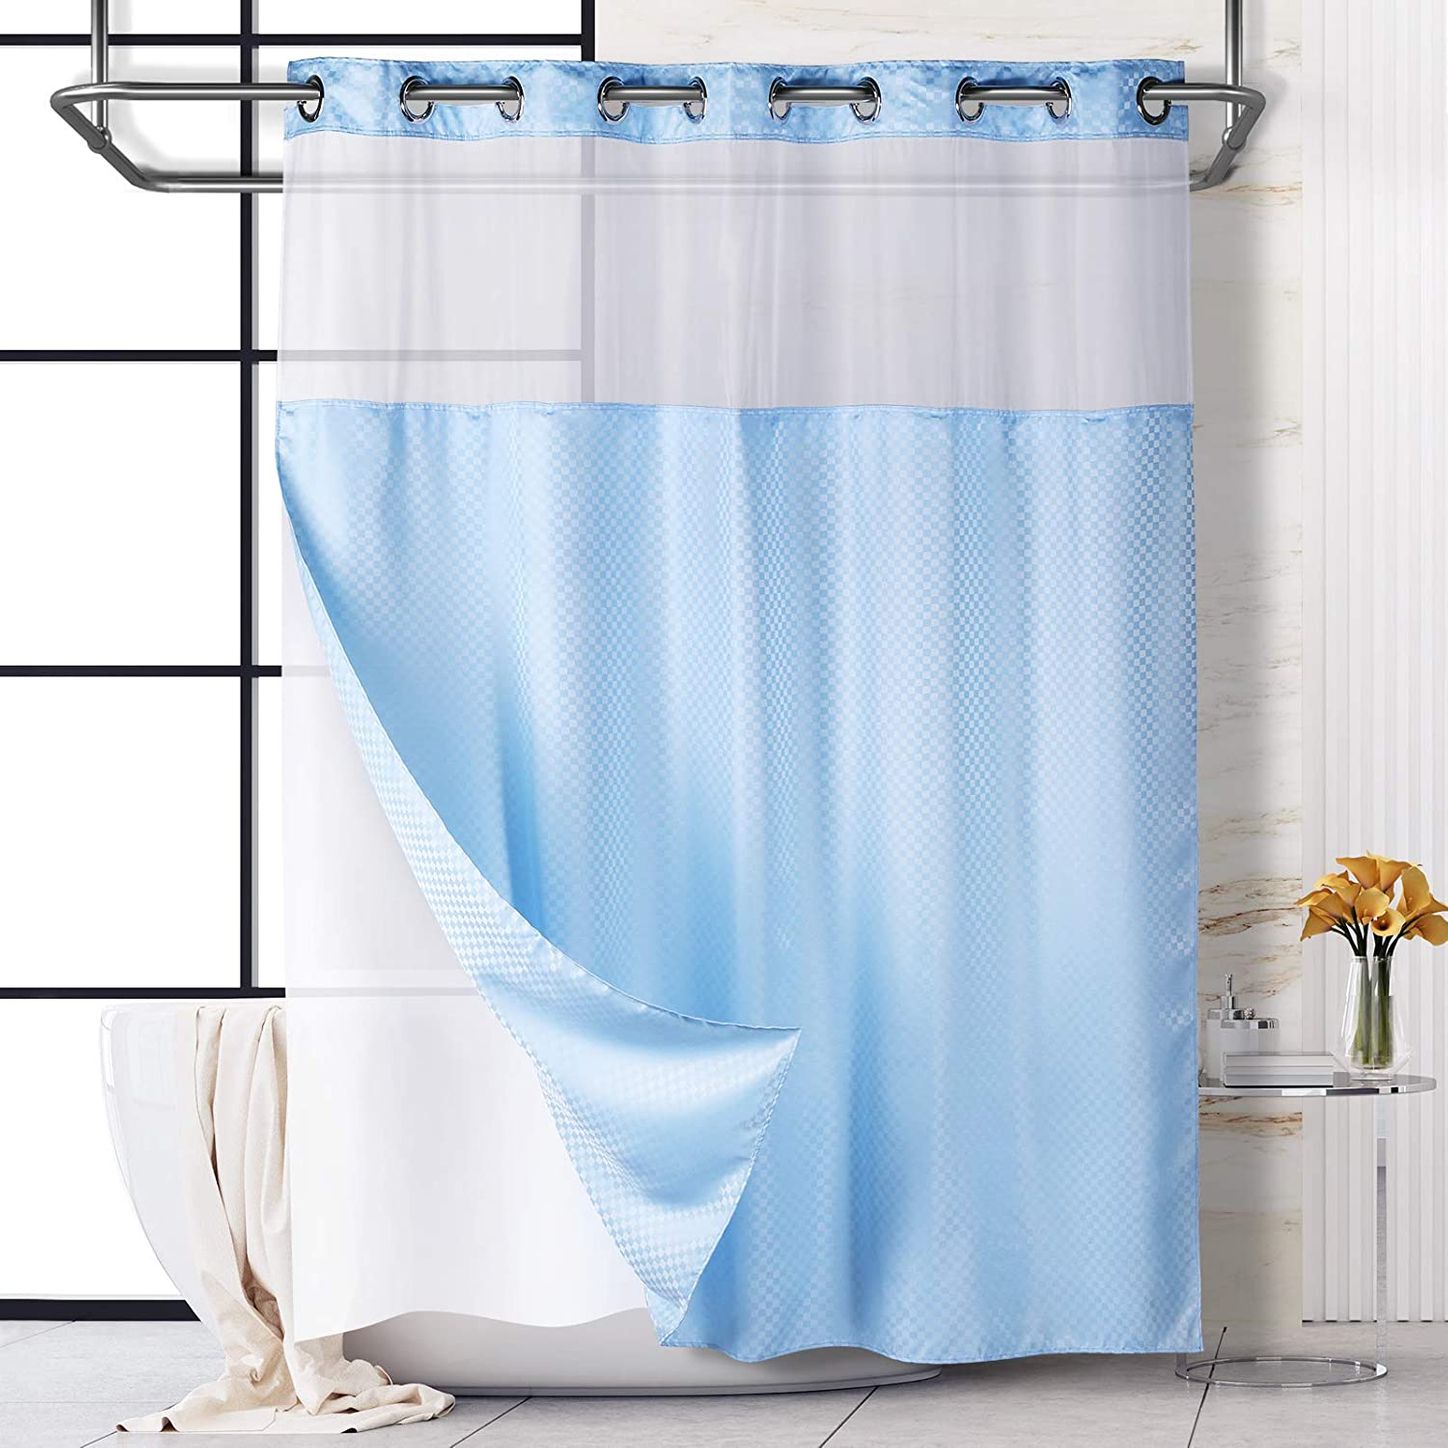 19 Best Shower Curtains 2021 The, Are Plastic Shower Curtains Bad For You